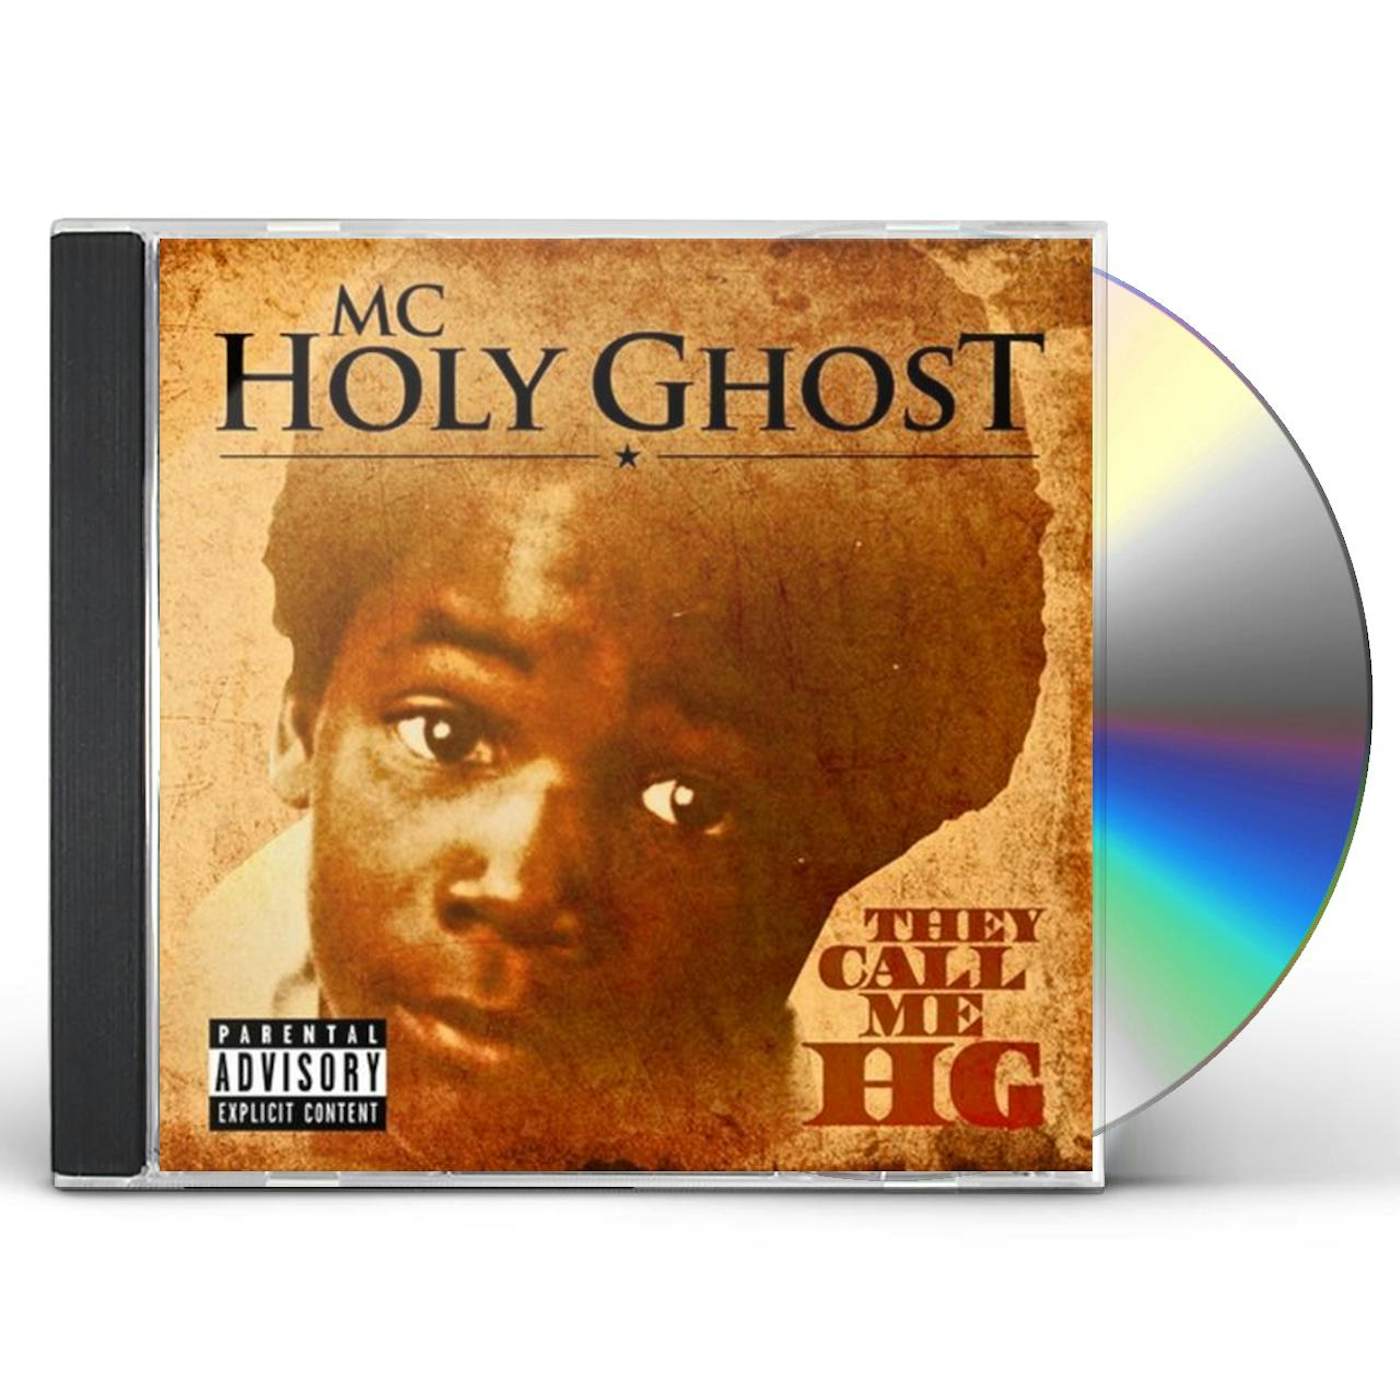 MC Holy Ghost THEY CALL ME HG CD